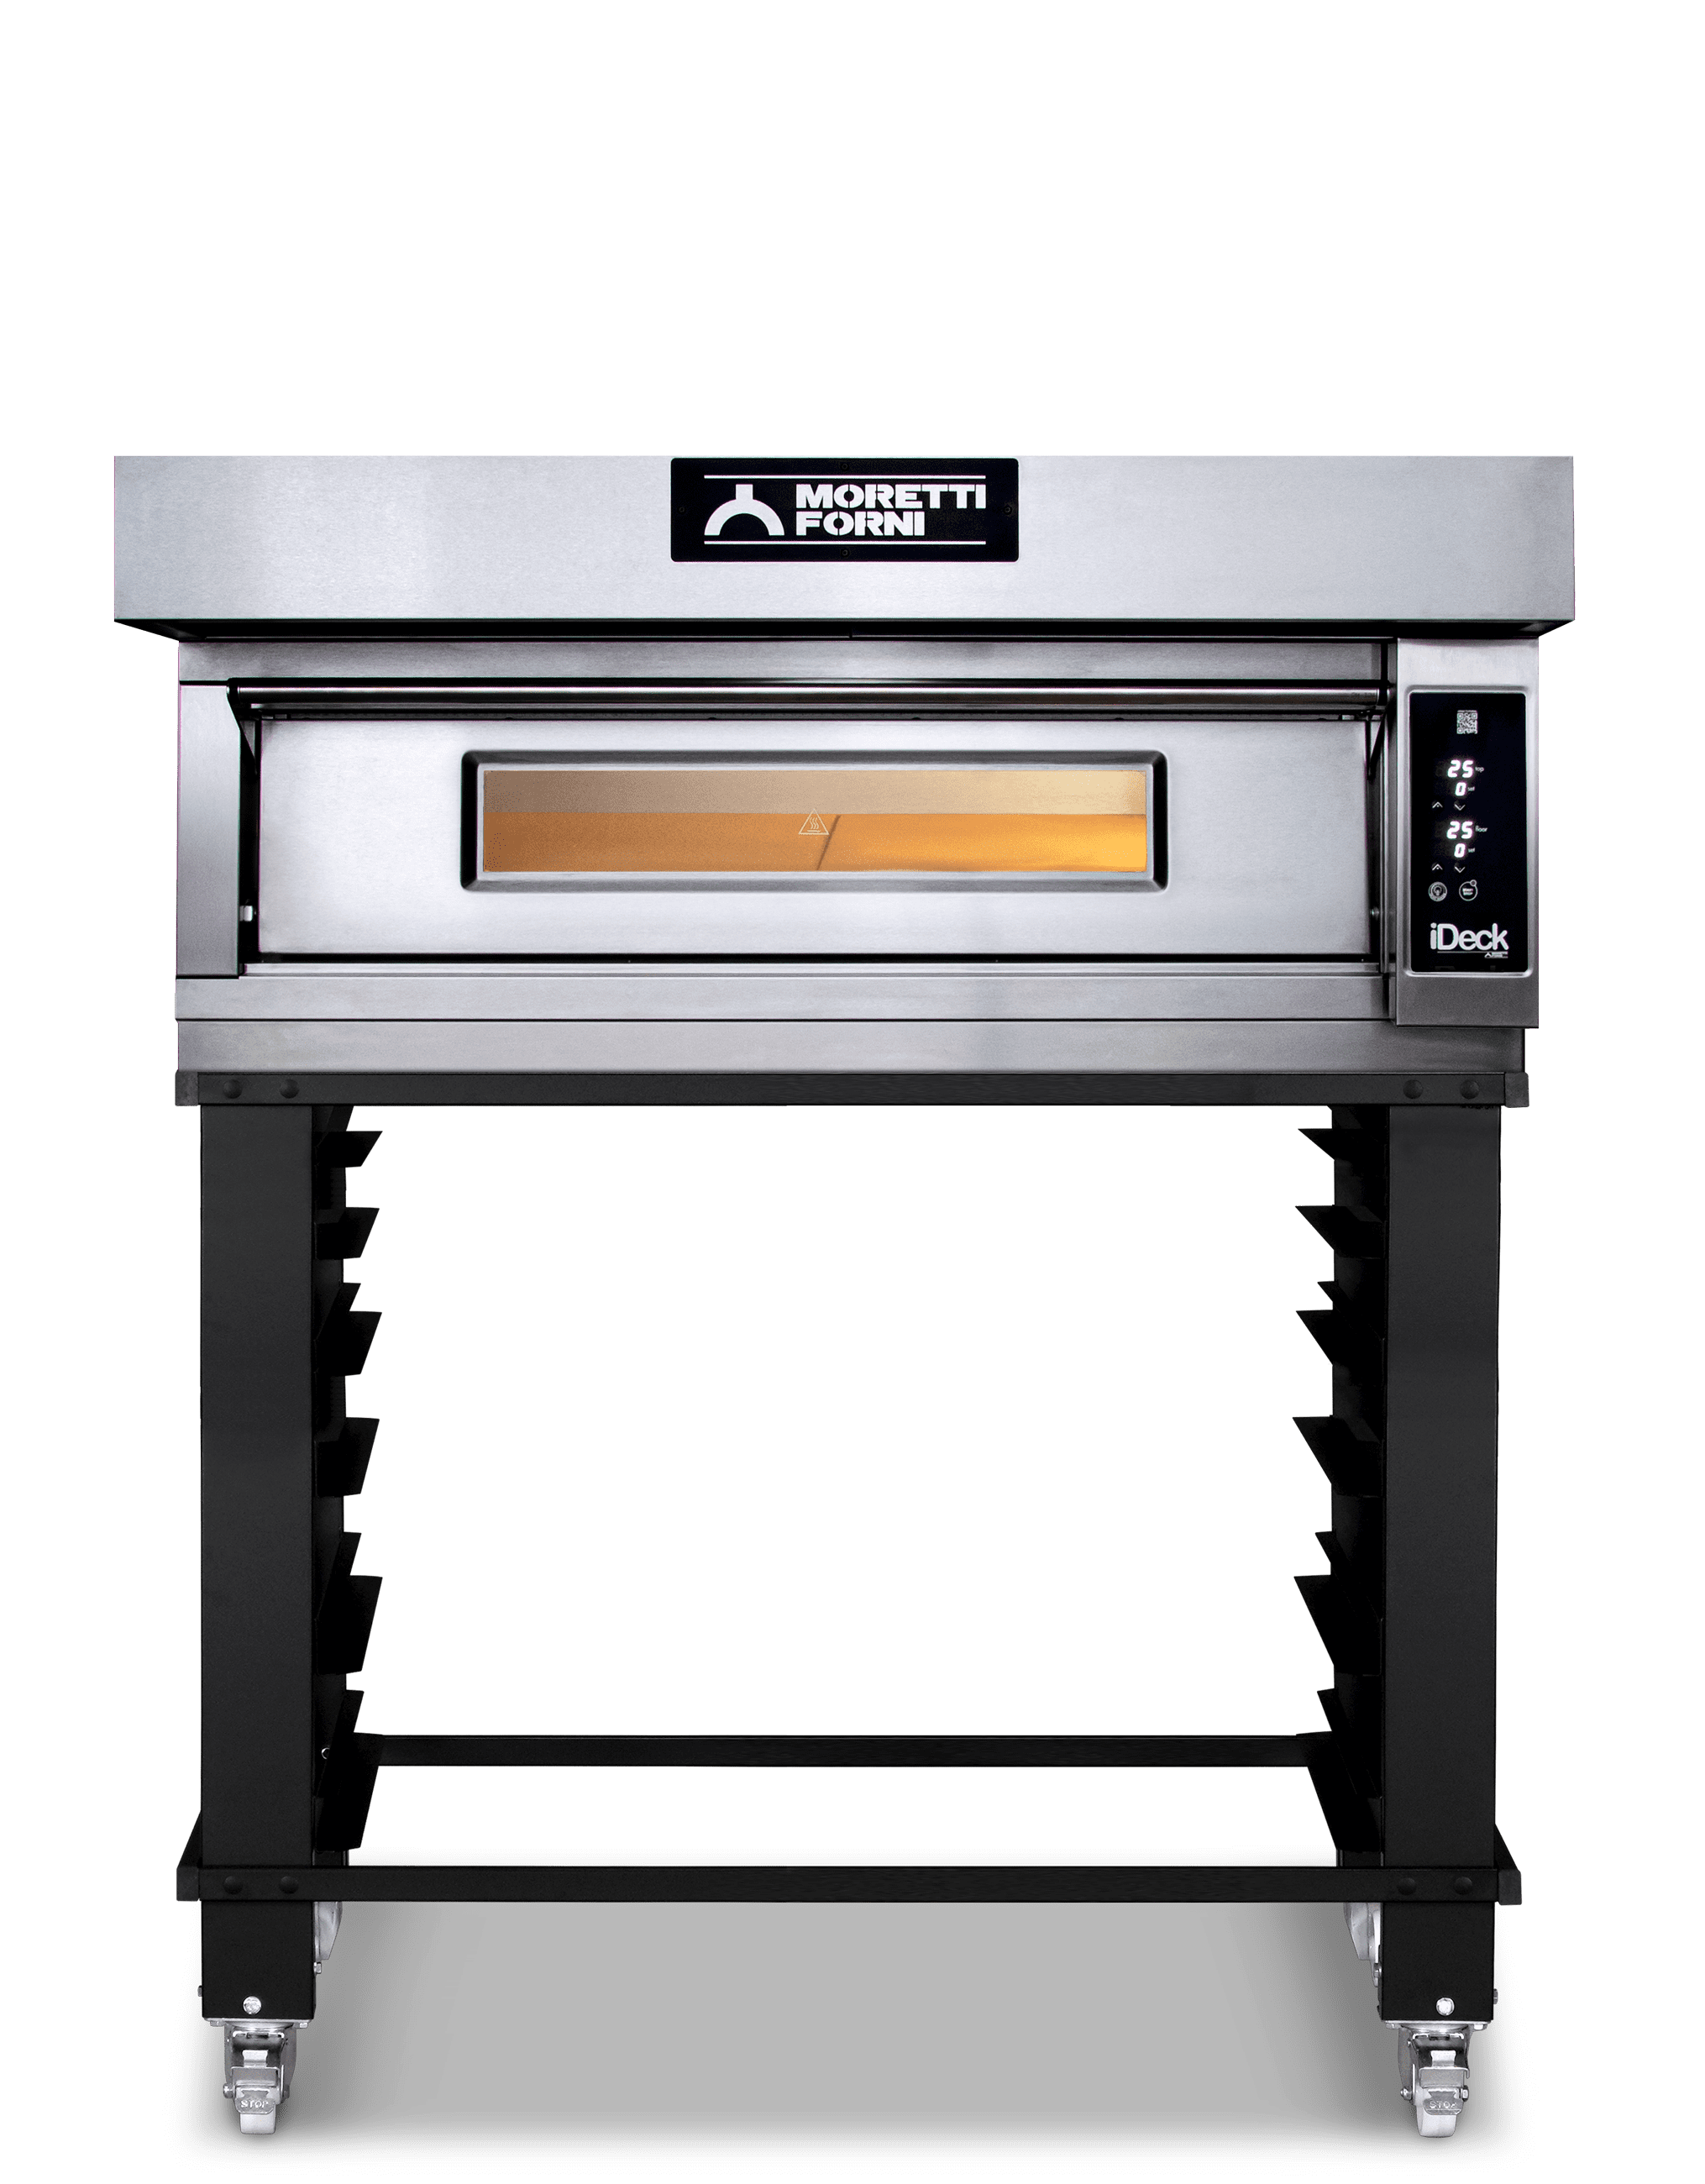 ID-M 105.65 iDeck electronic Control Electric Pizza Oven 105 x 65 cm chamber. 1 Deck